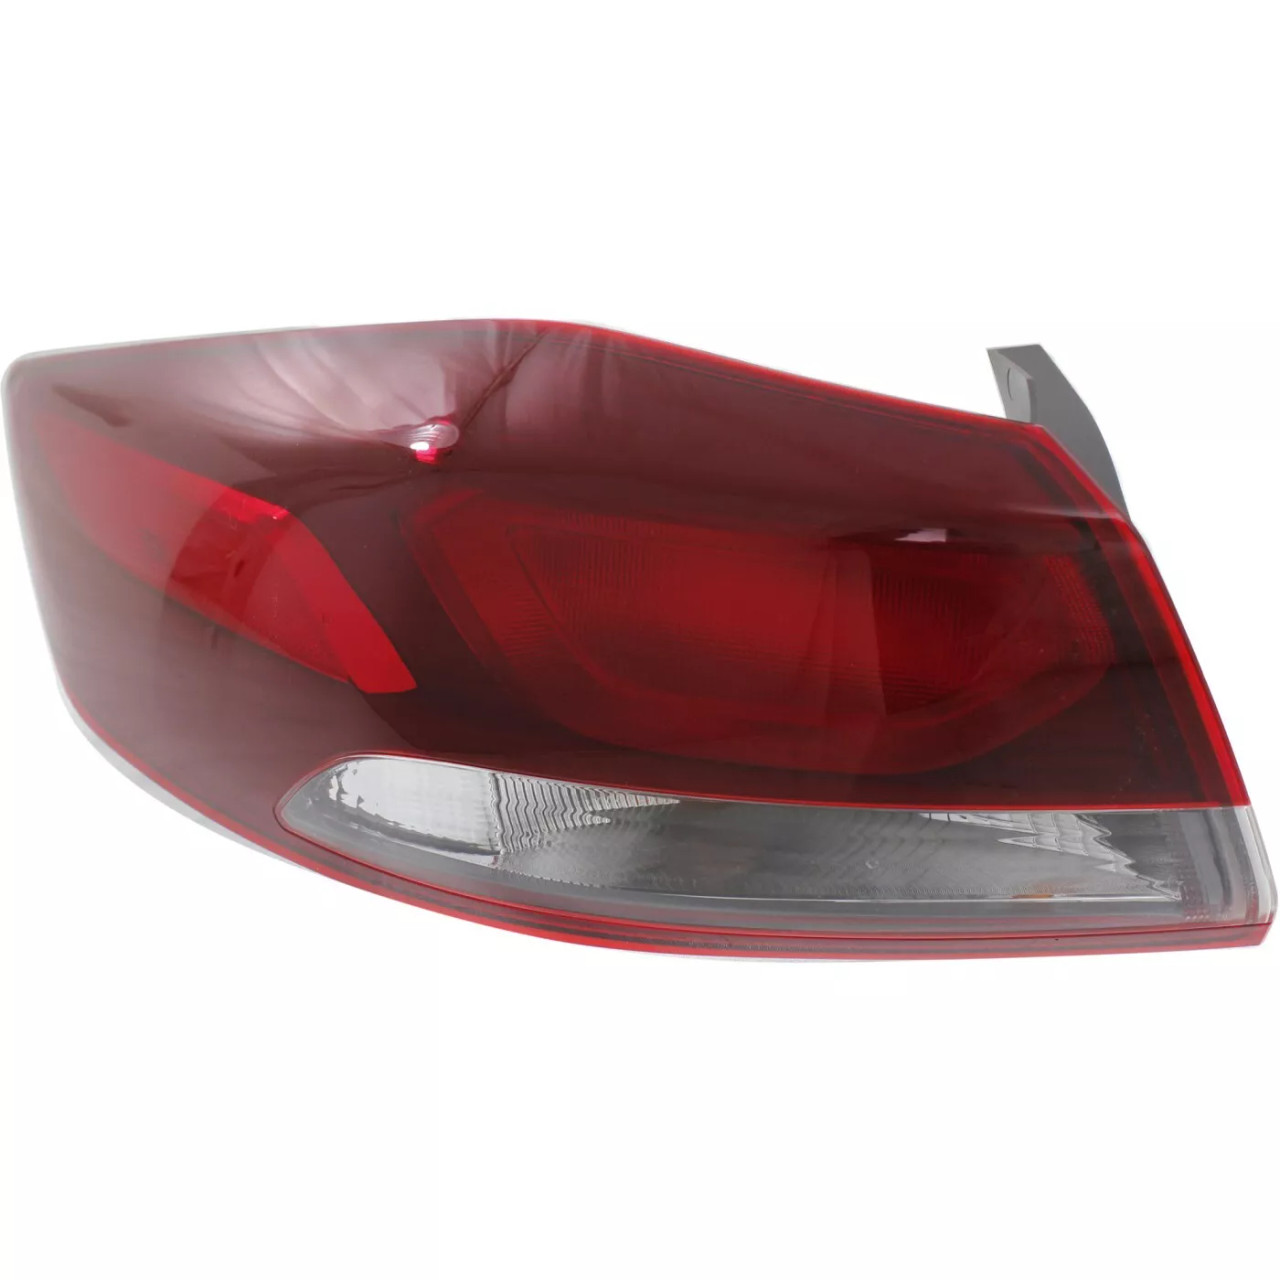 Tail Light Set For 2017-2018 Hyundai Elantra LH RH Outer Clear/Red Halogen/LED